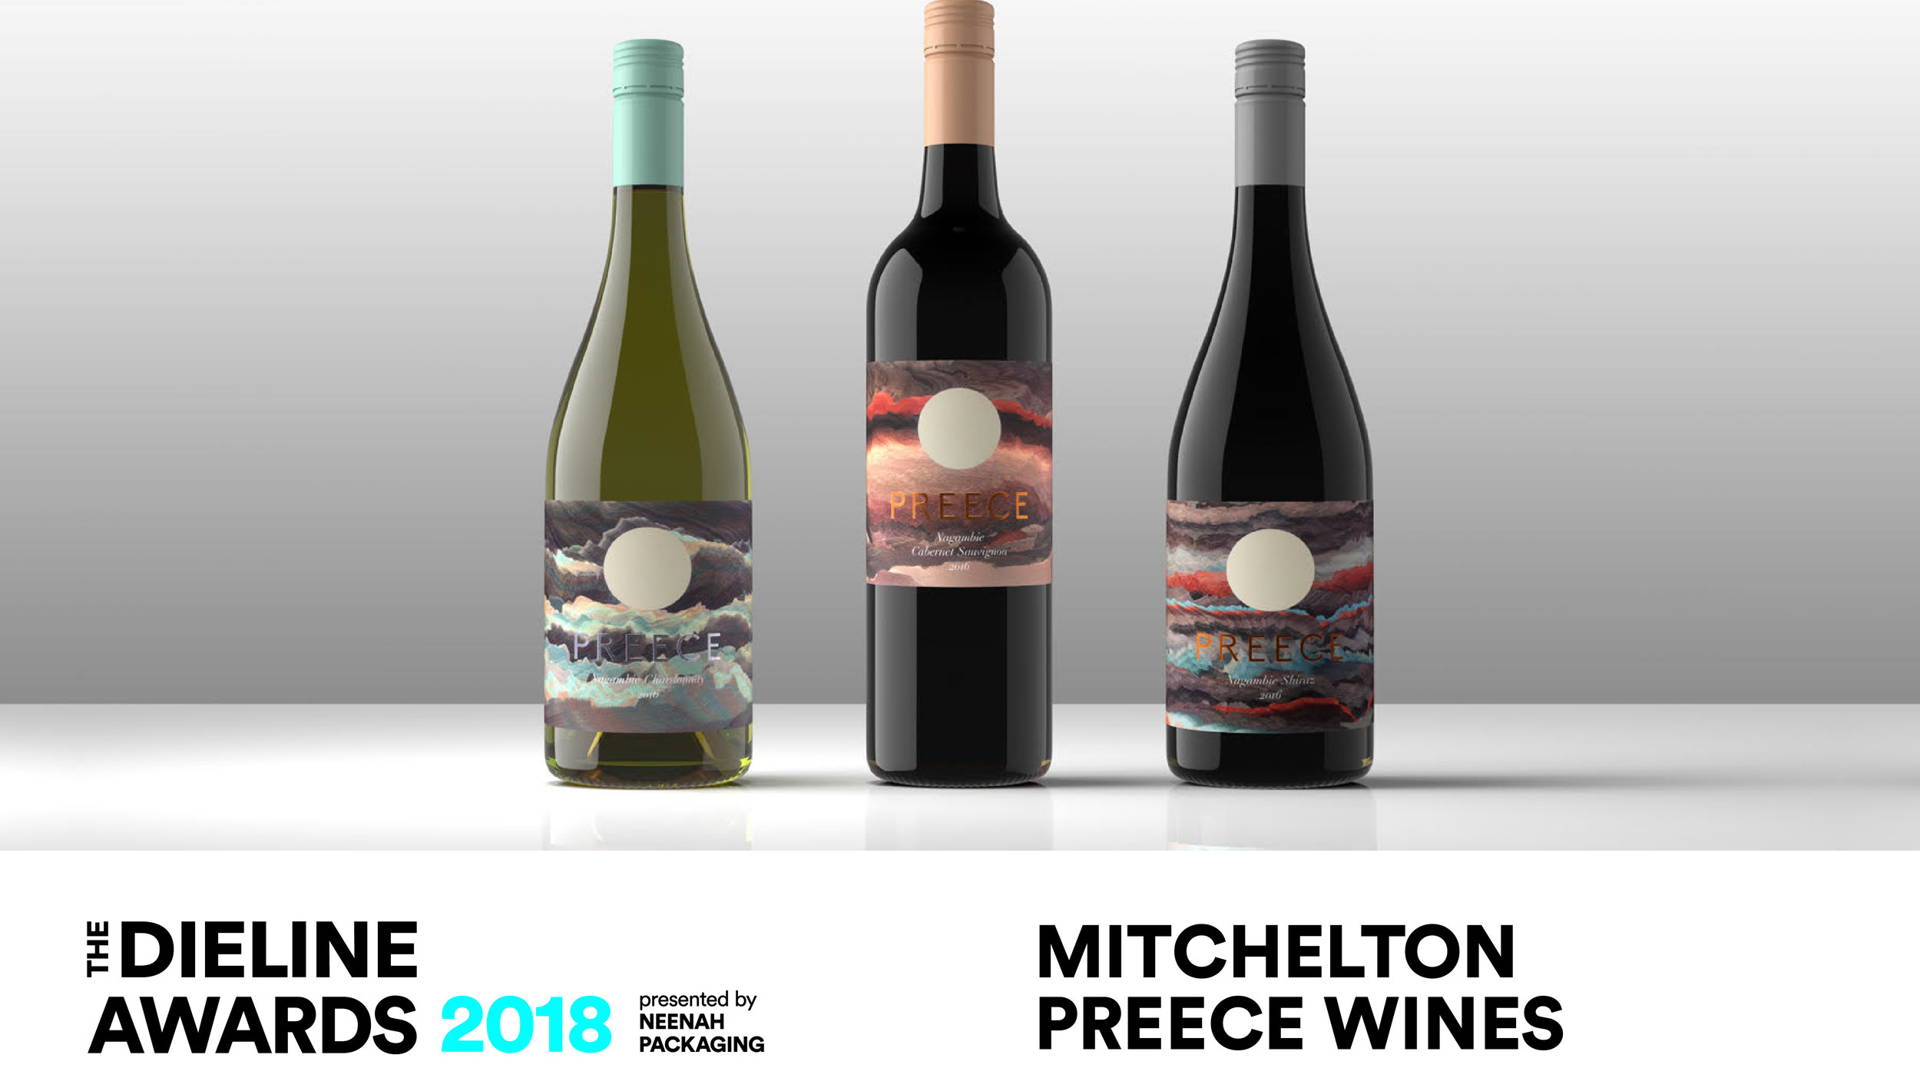 Featured image for The Dieline Awards 2018 Outstanding Achievements: Mitchelton Preece Wines